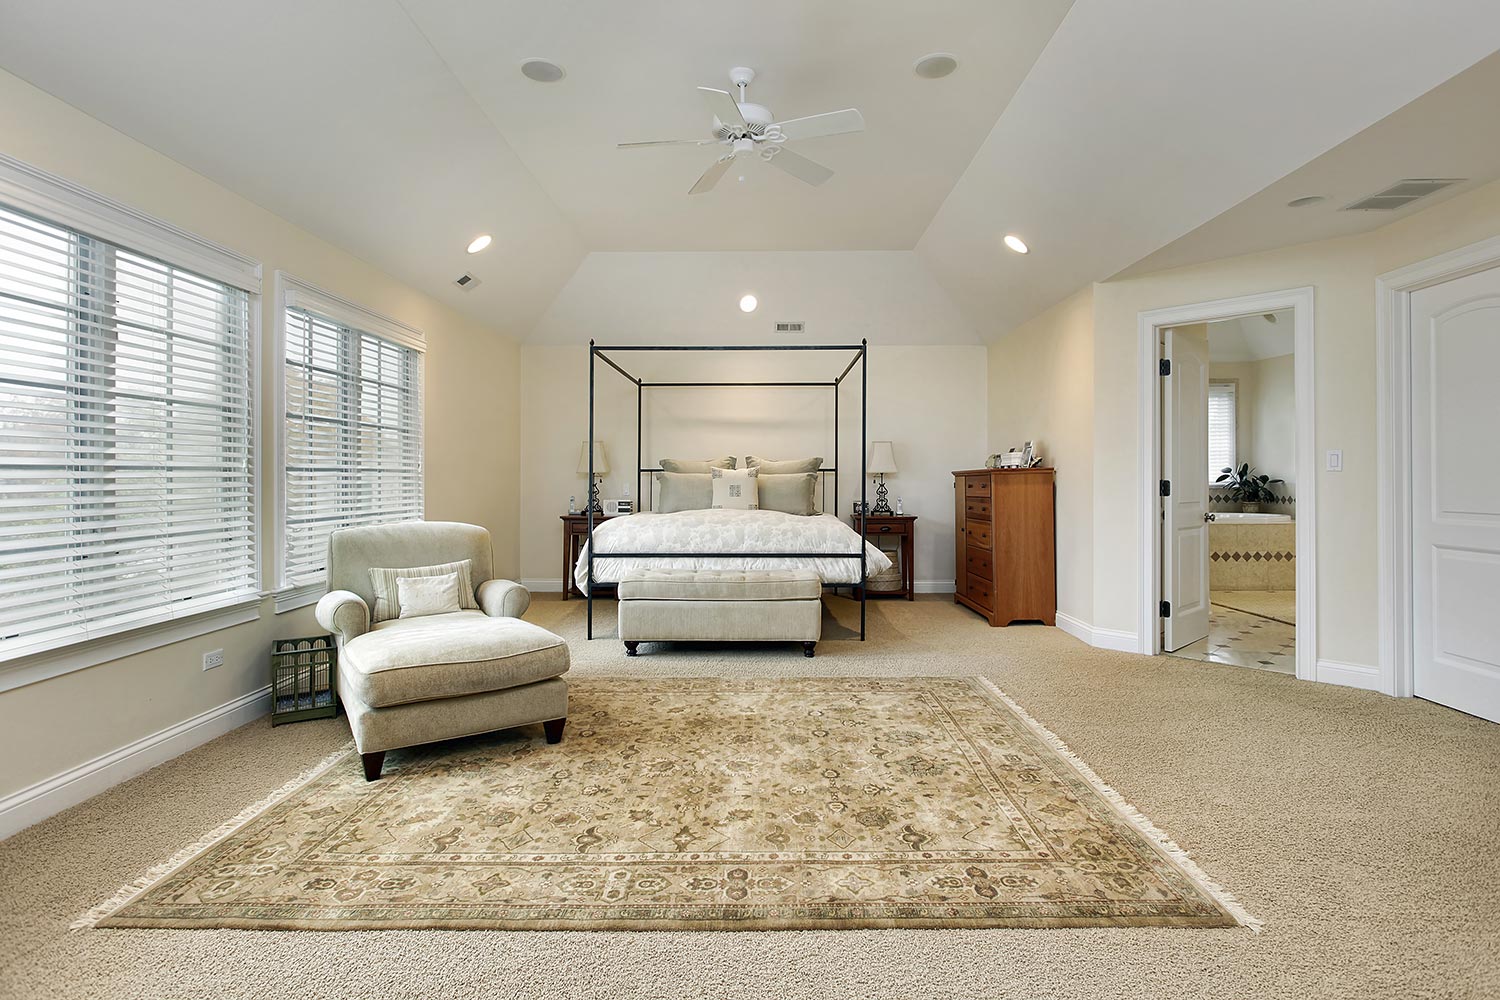 Master bedroom in luxury home with tray ceiling